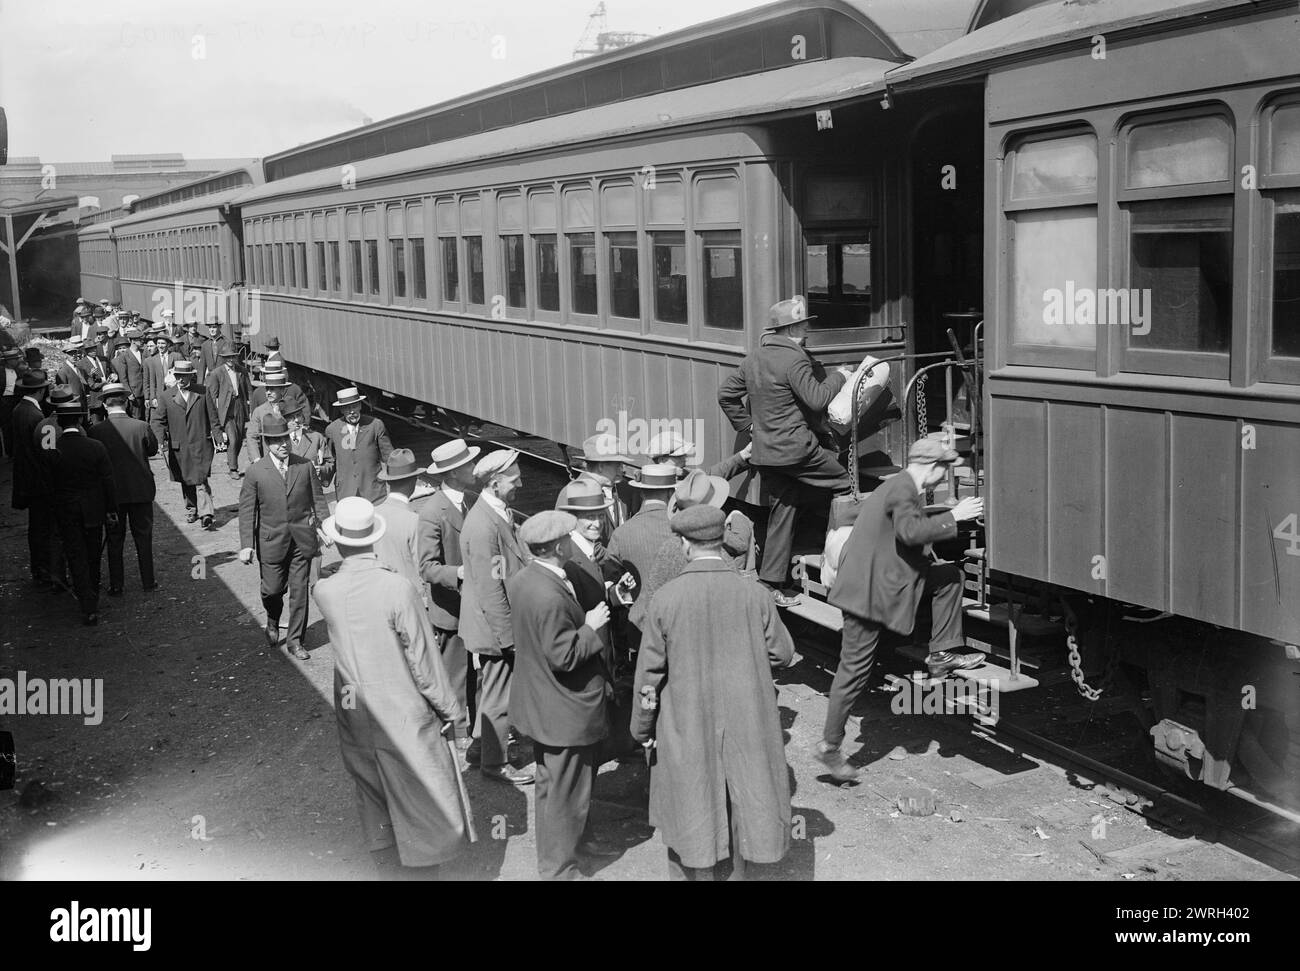 Going to Camp Upton, Sept 1917. American recruits going to Camp Upton, a U.S. Army installation located on Long Island, in Yaphank, New York, during World War I. Stock Photo